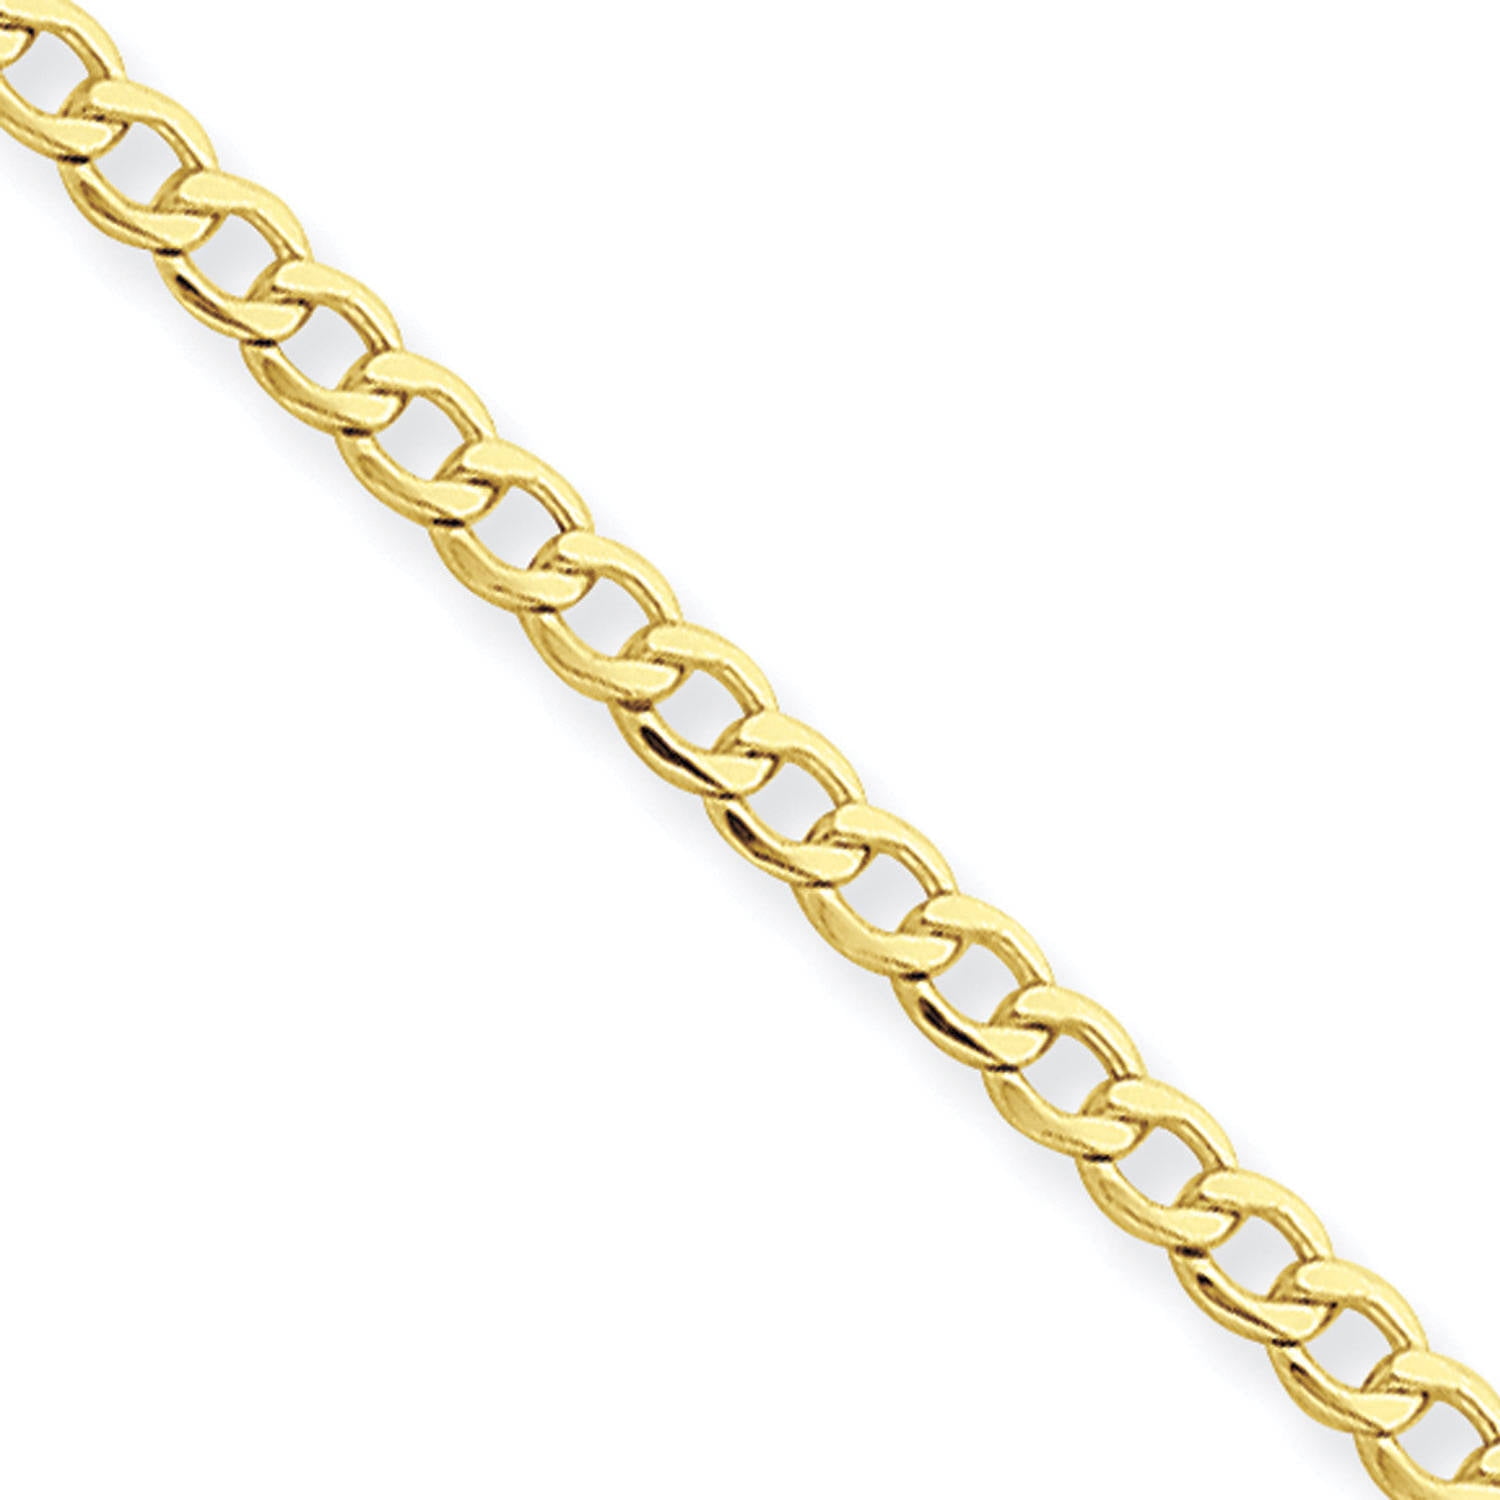 14k White Gold 3.35mm Semi-Solid Curb Link Chain 14 kt White Gold 18 in Length